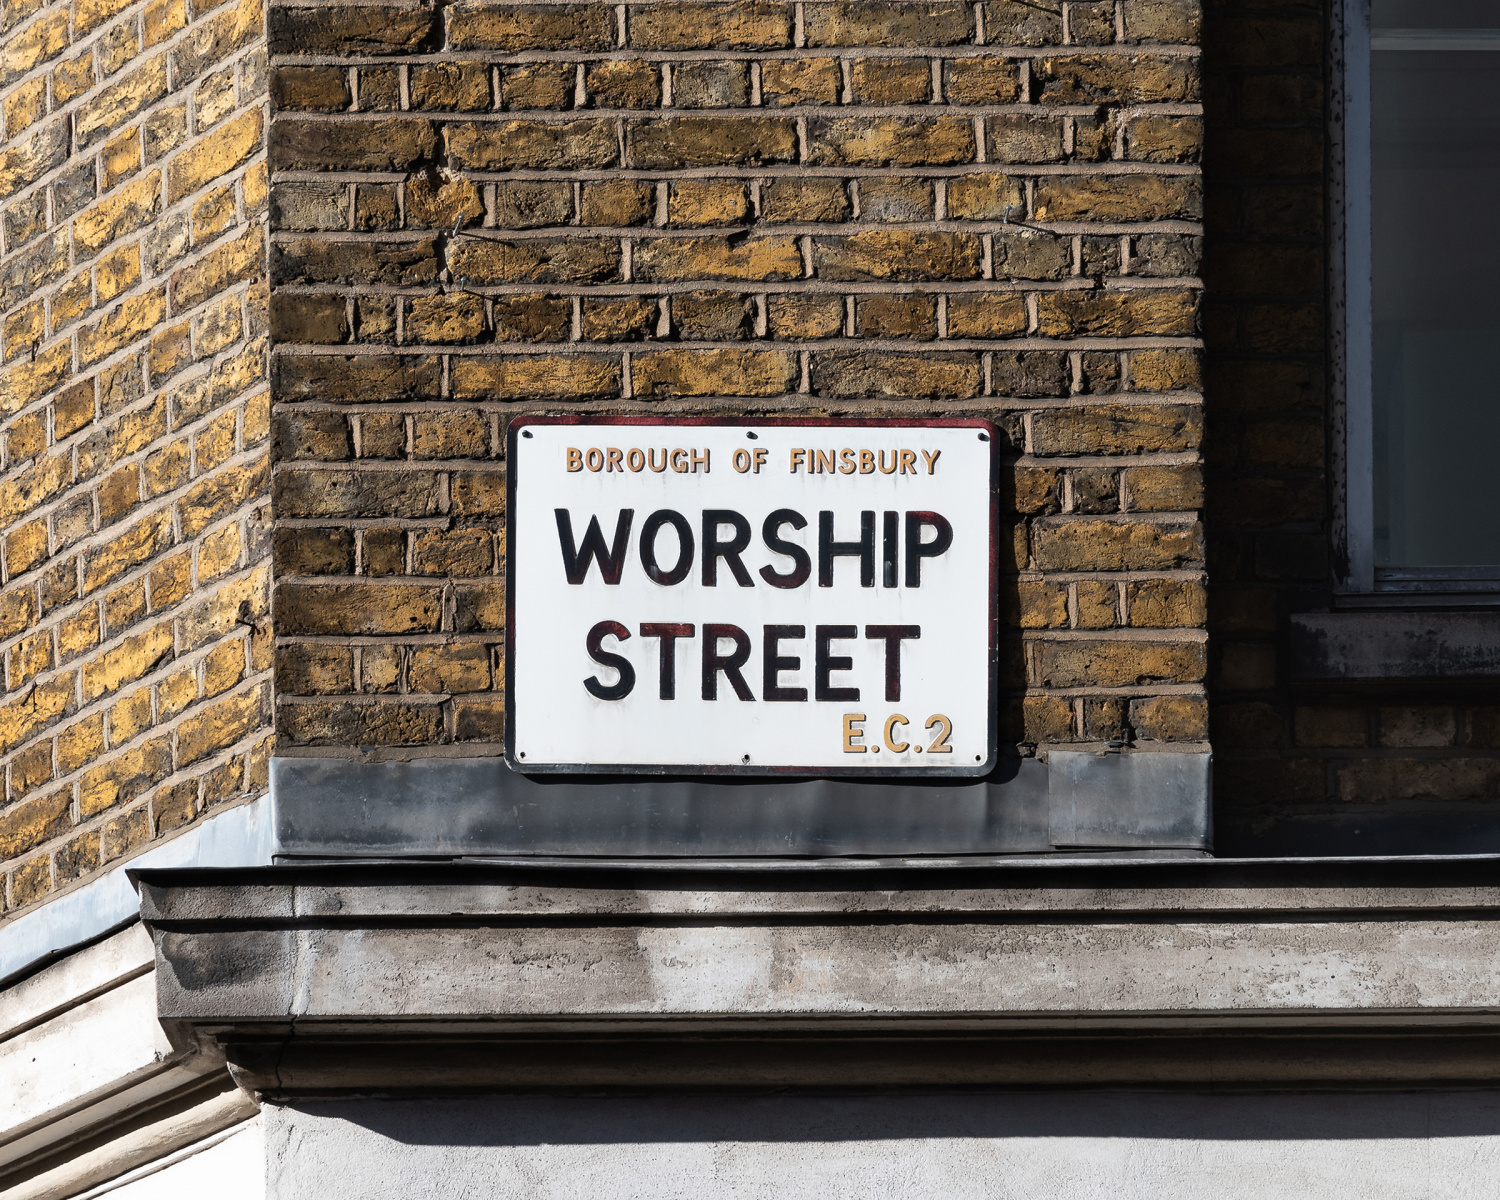 There Are No Places of Worship on This Street